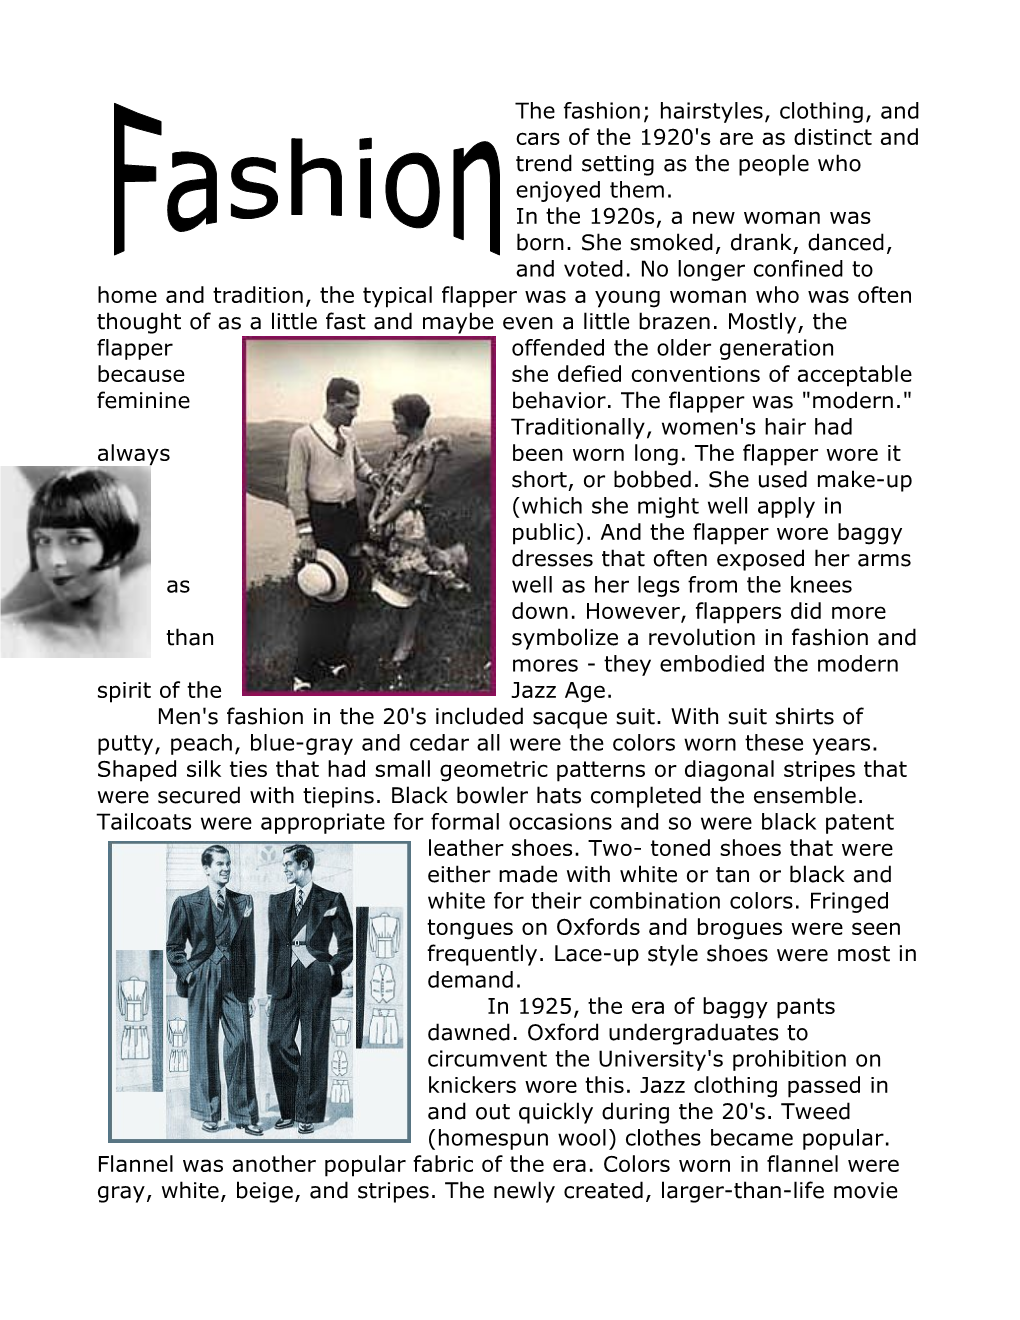 The Fashion; Hairstyles, Clothing, and Cars of the 1920'S Are As Distinct and Trend Setting